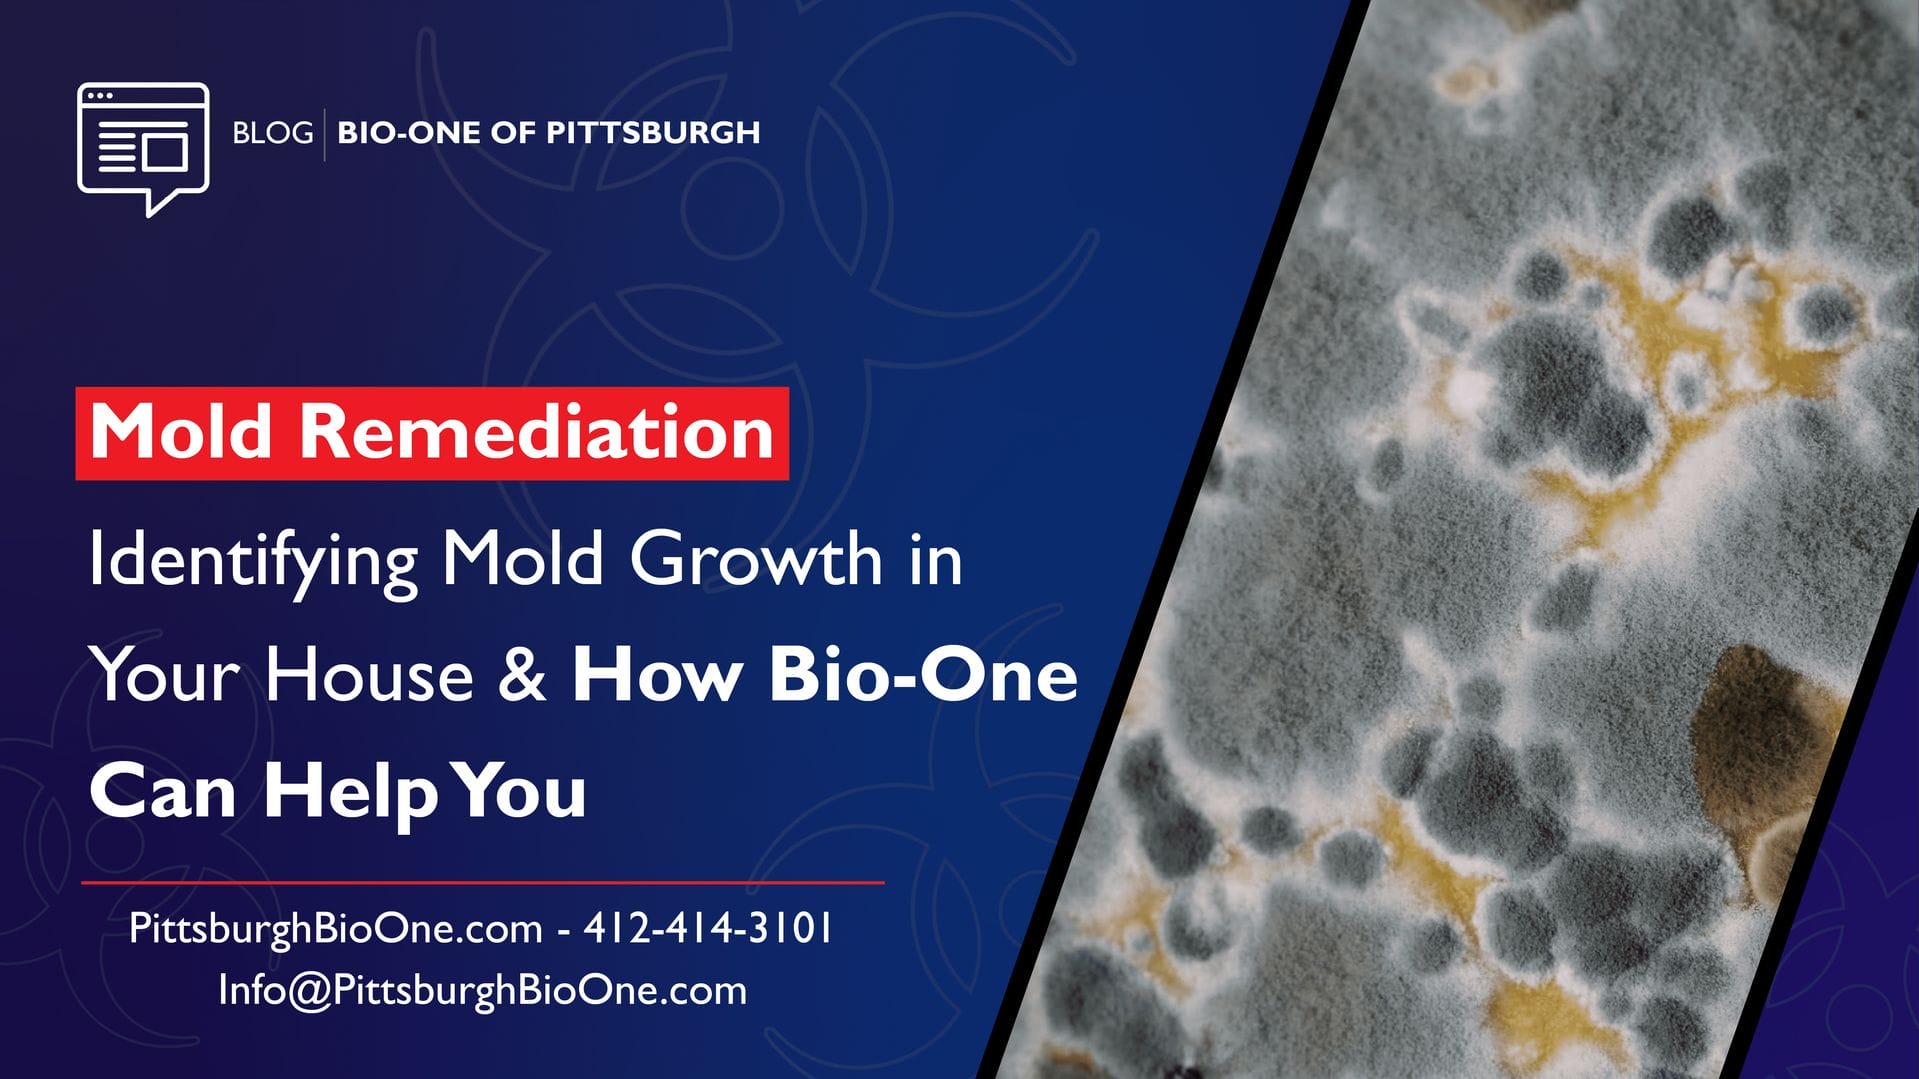 Identifying Mold Growth in Your House & How Bio-One Can Help You